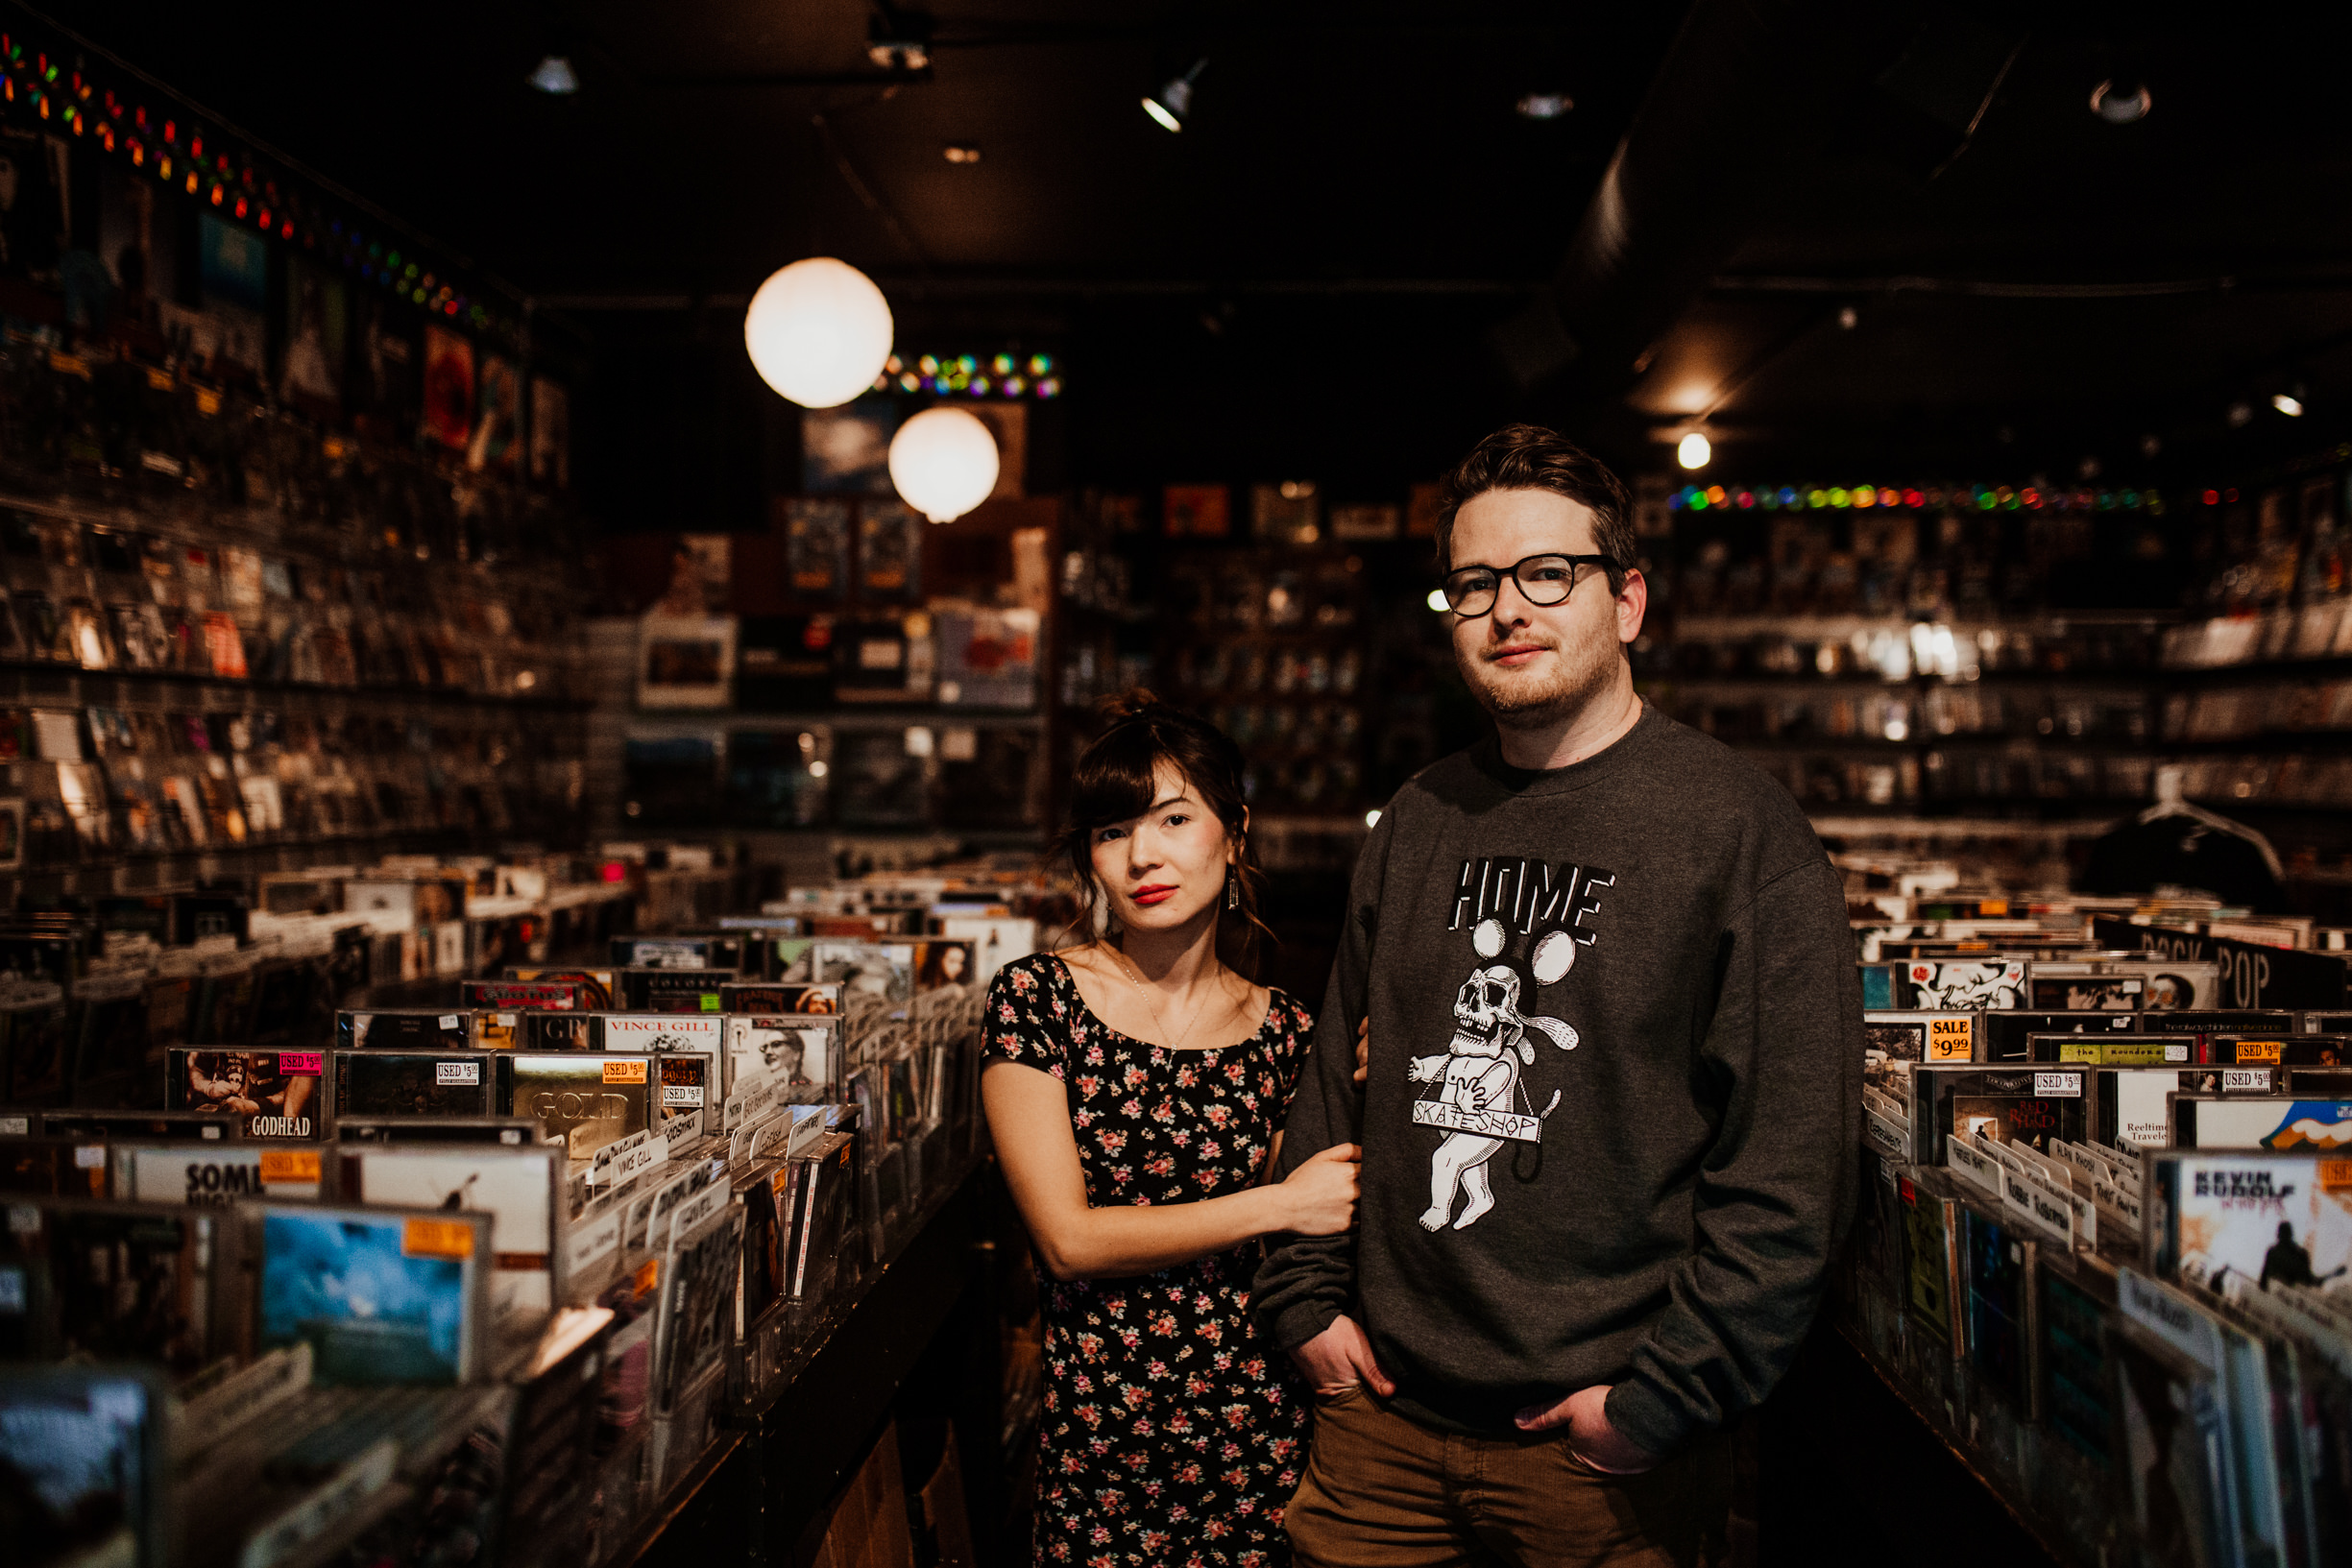 louisville-engagement-photographer-record-store-in-home-session-crystal-ludwick-photo (50 of 53).jpg